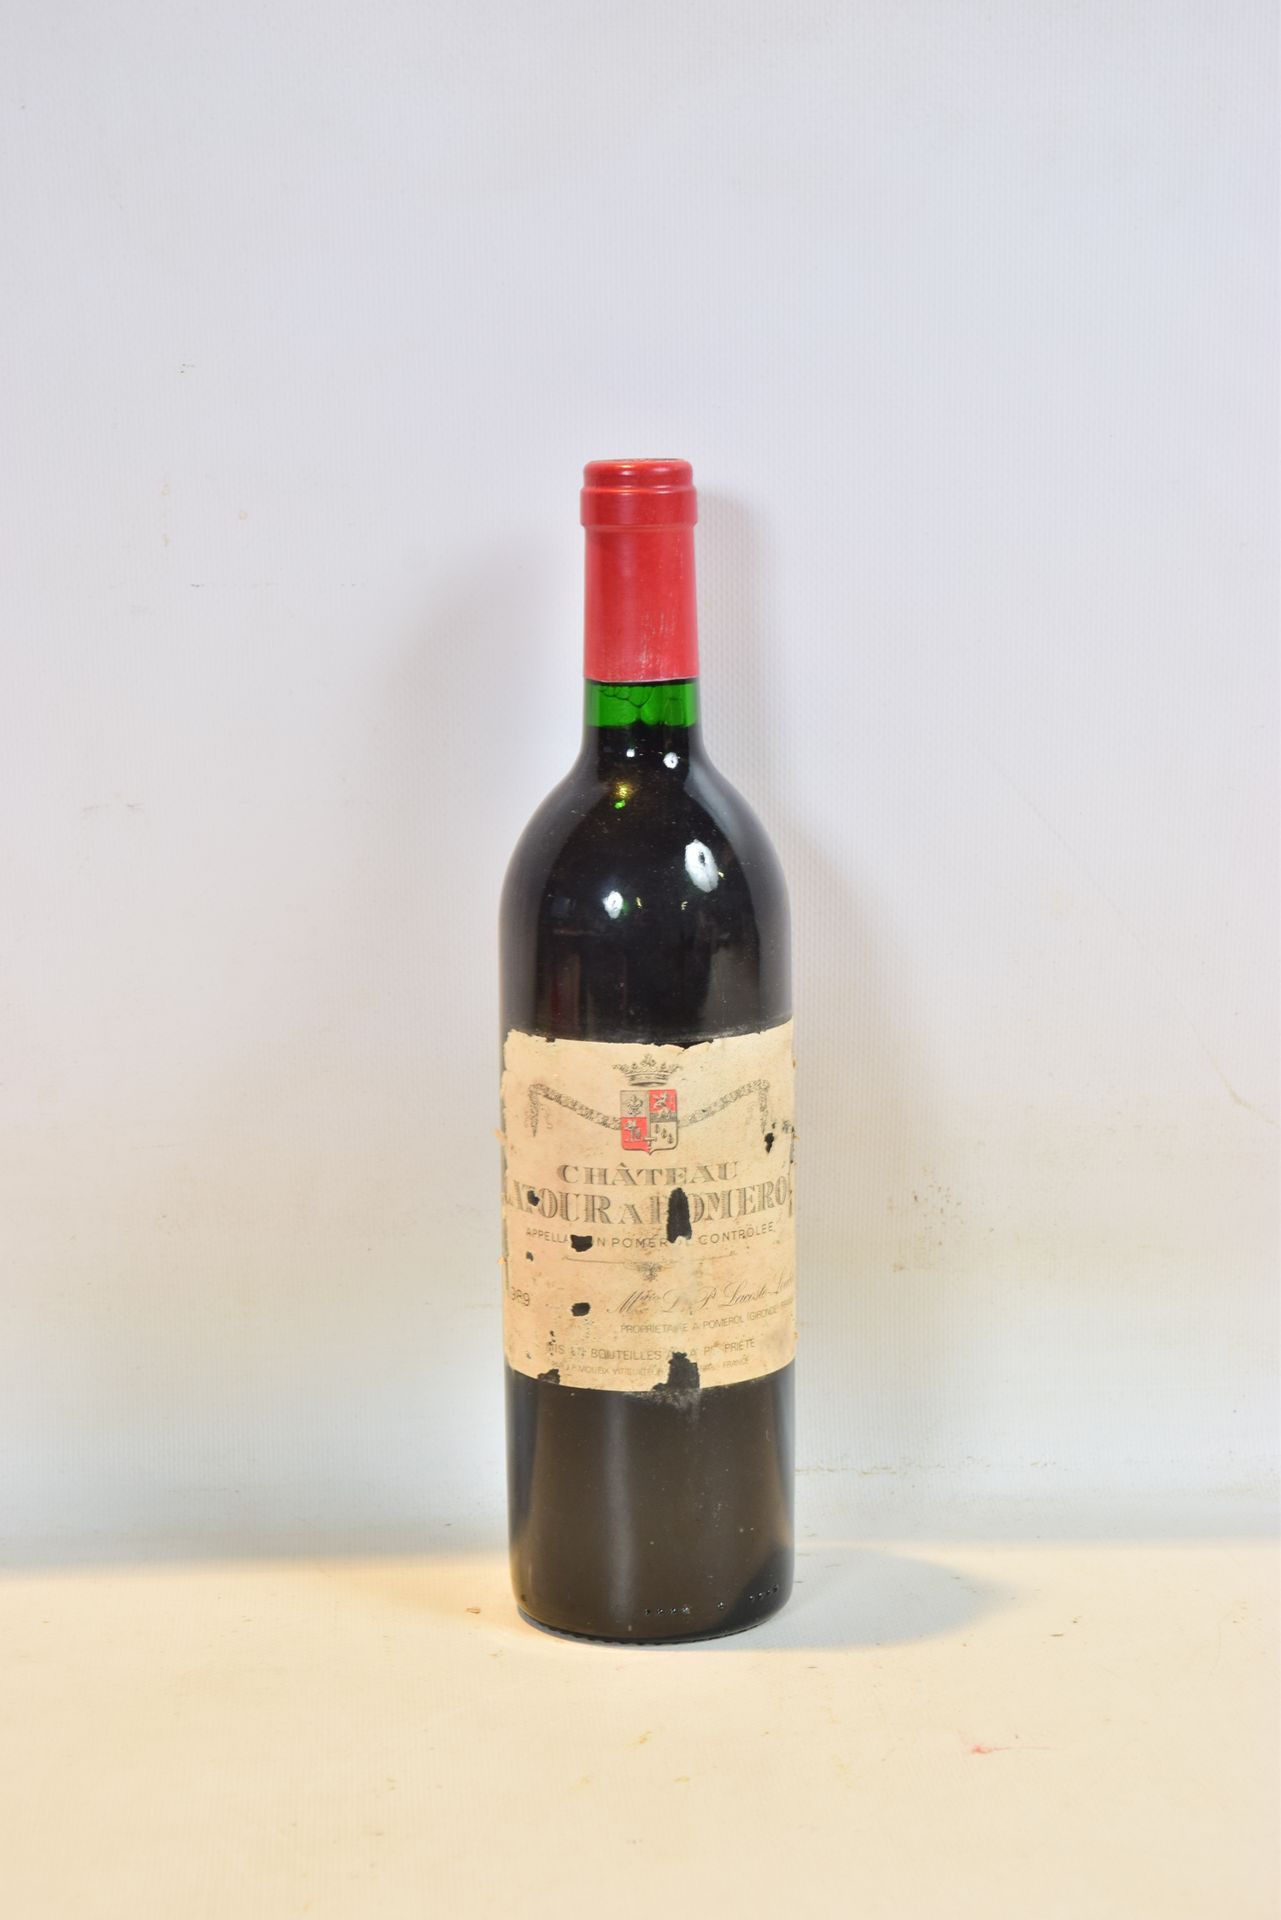 Null 1 Blle CH. LATOUR A POMEROL Pomerol 1989

	Faded, stained, worn and torn. N&hellip;